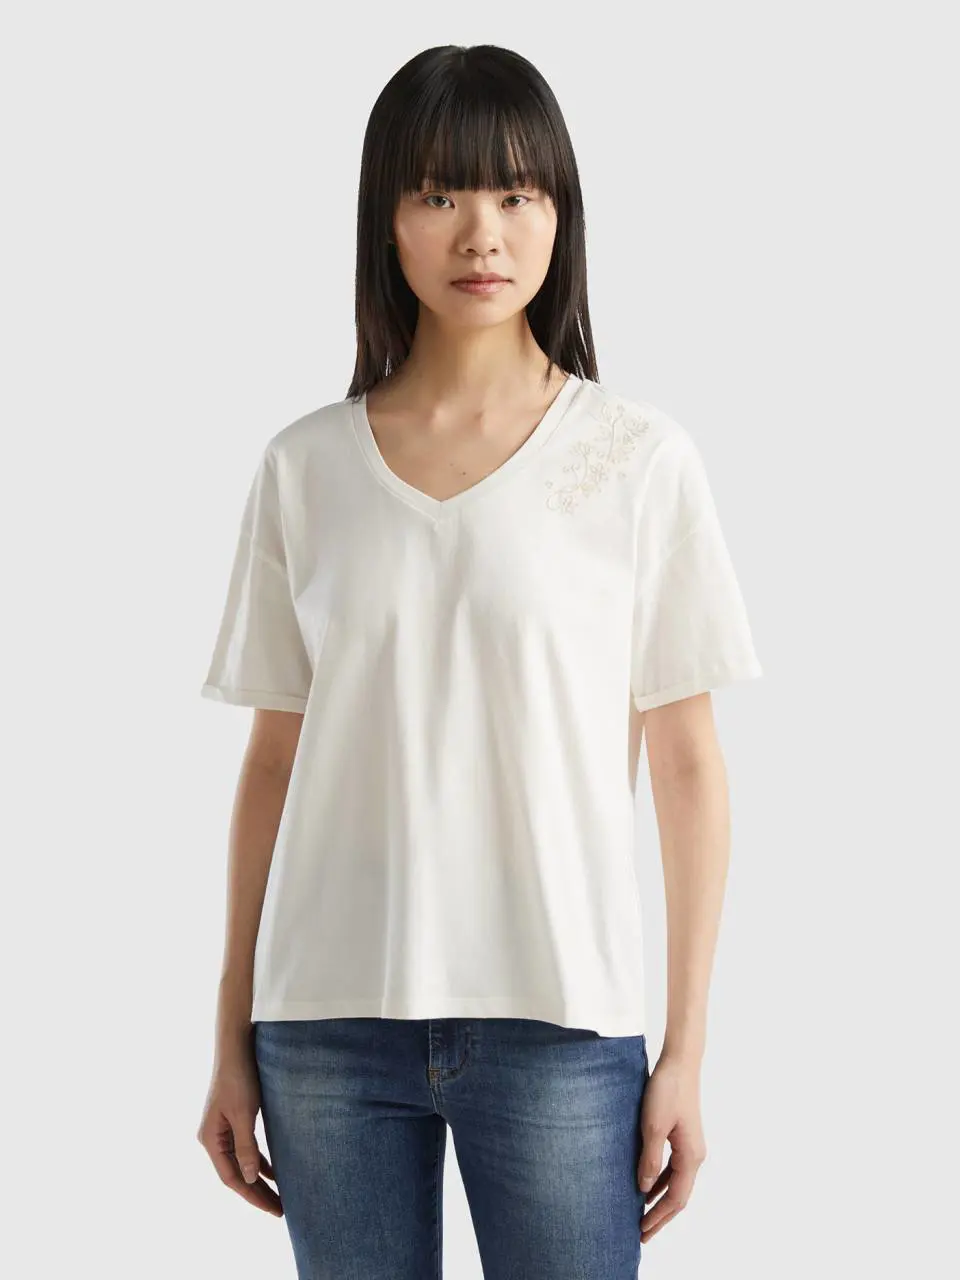 Benetton t-shirt with floral embroidery. 1